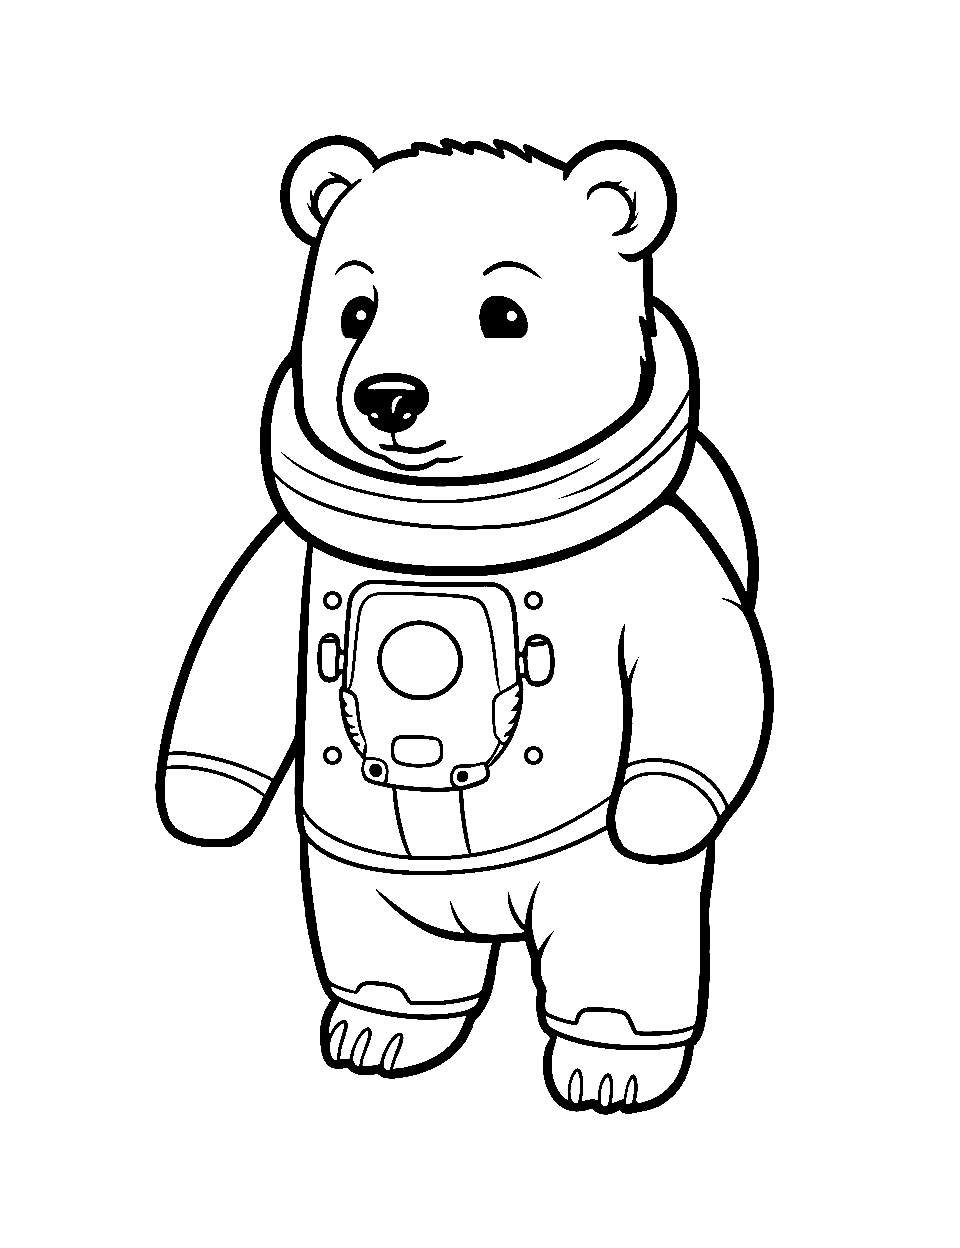 Bear Astronaut Costume Coloring Page - A bear in a space suit costume ready to head out for the dress-up party.